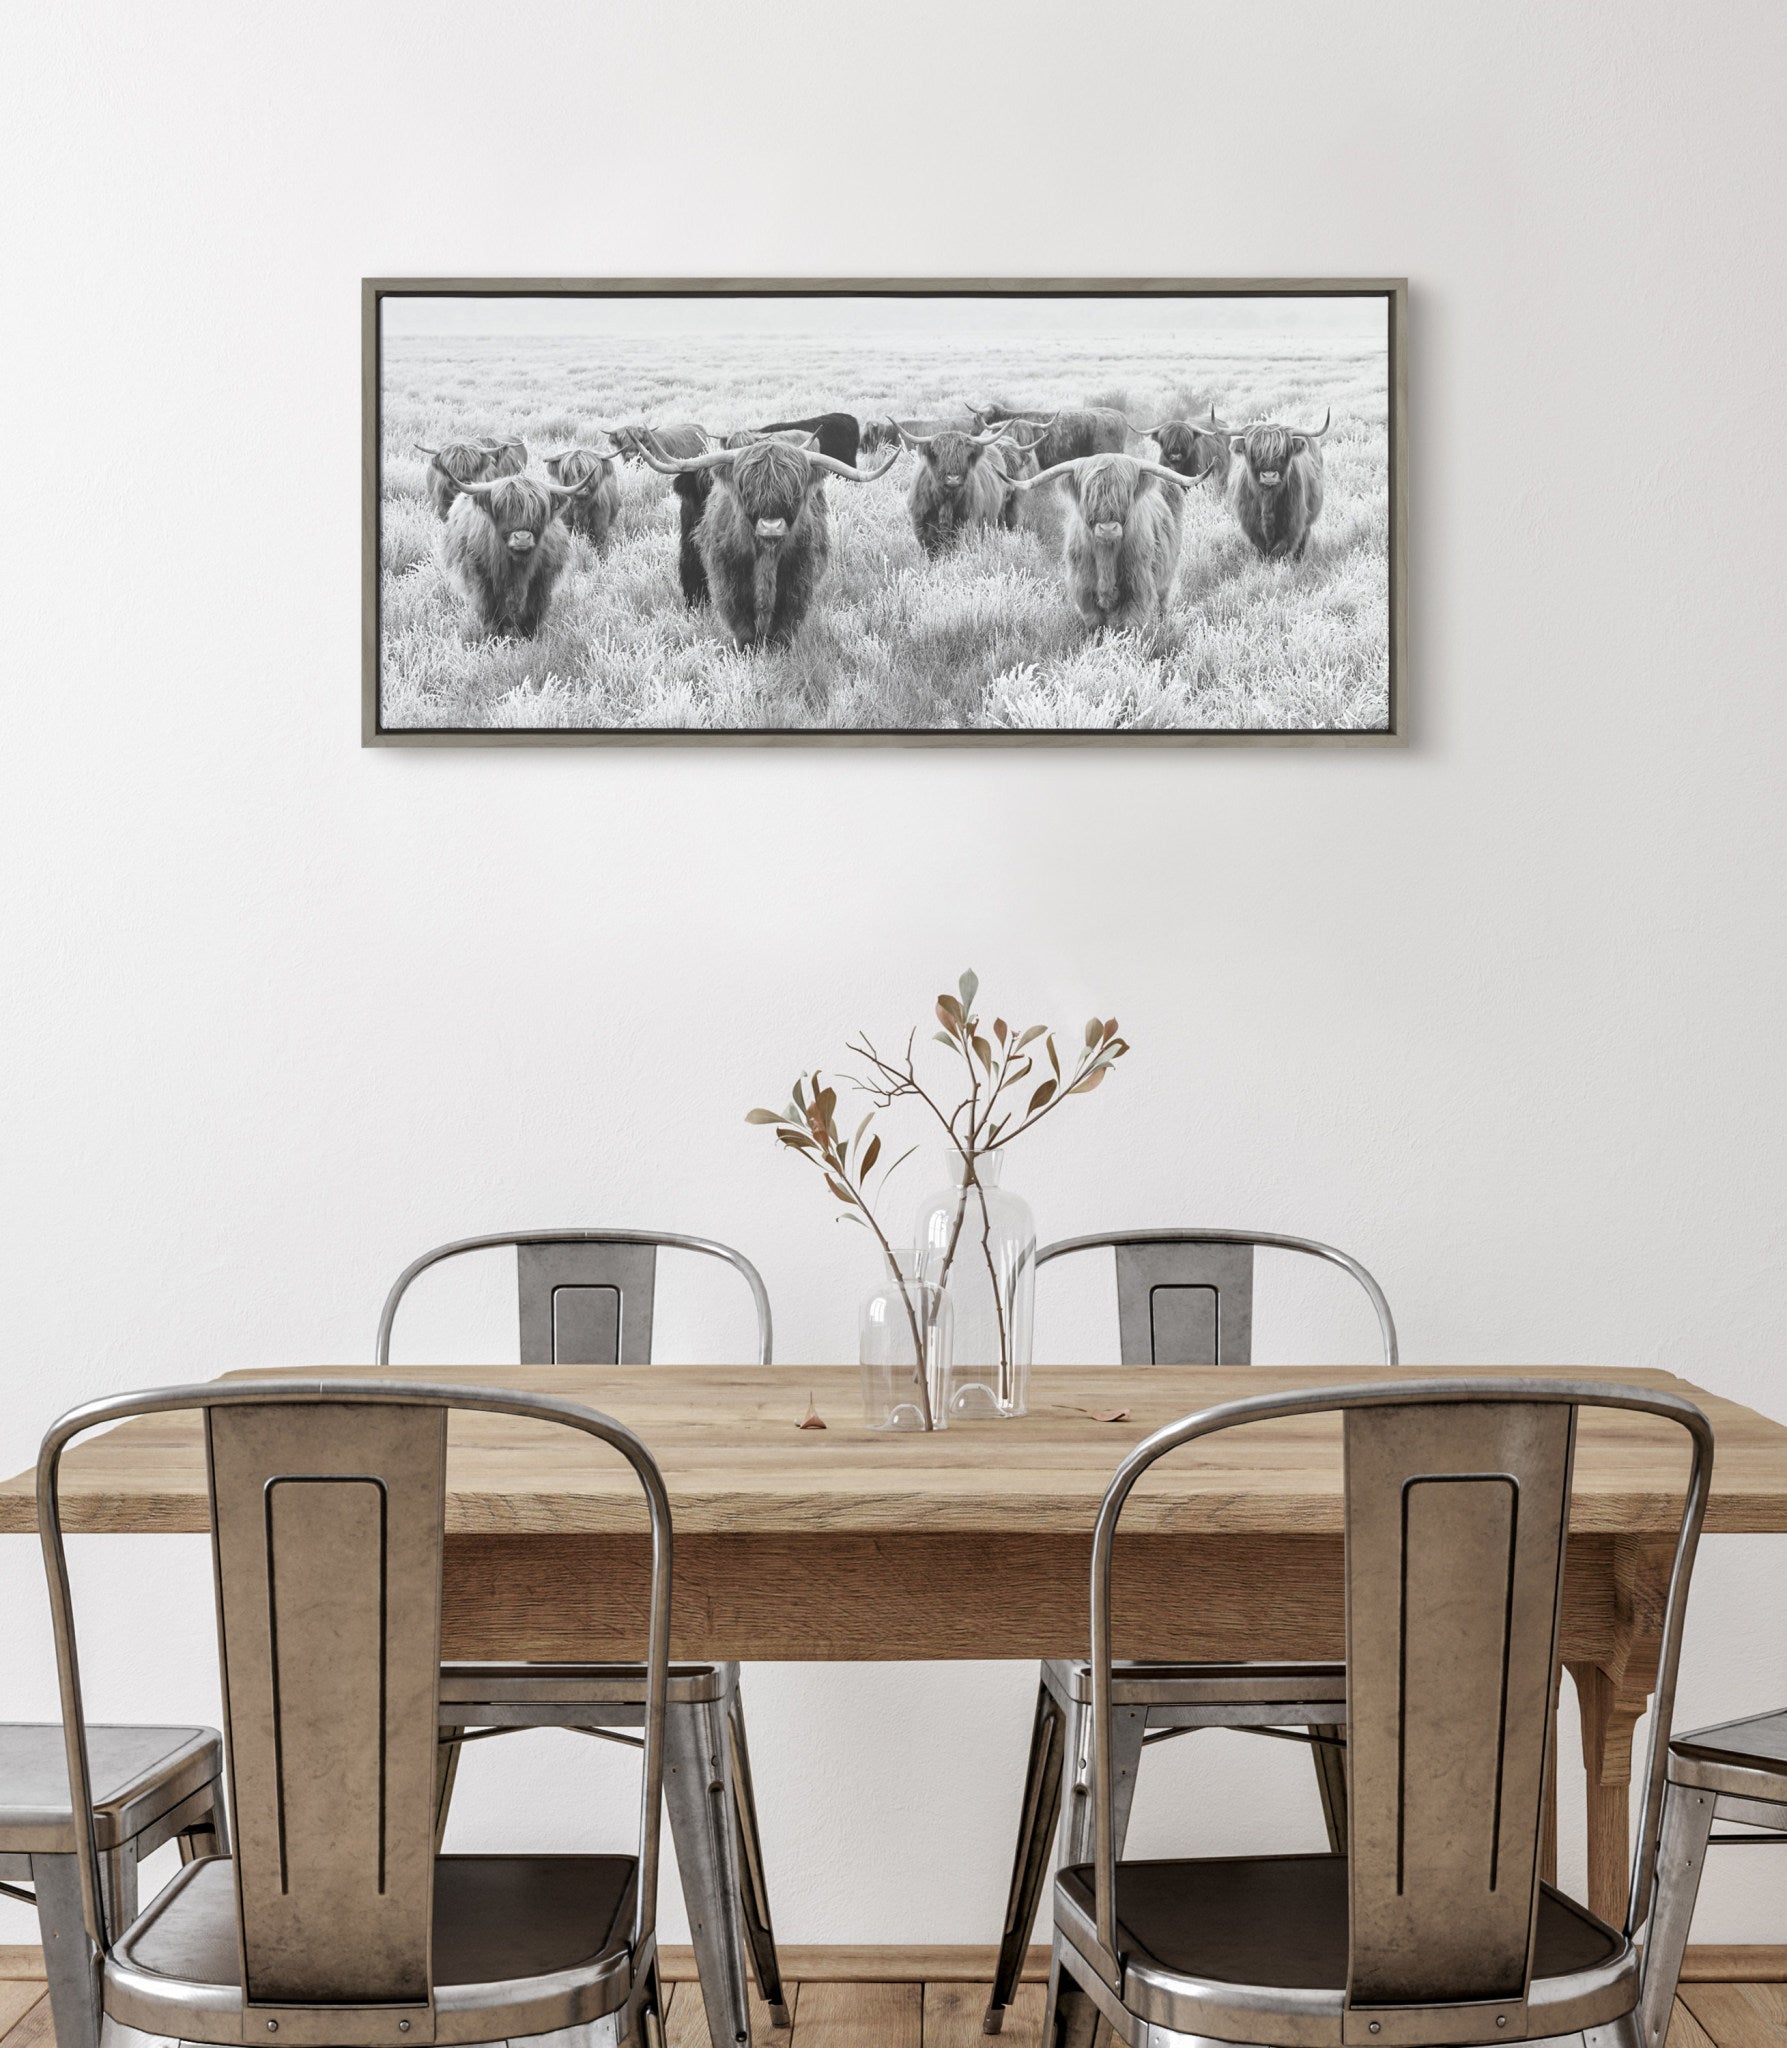 Sylvie Herd of Highland Cows Black and White Framed Canvas by The Creative Bunch Studio